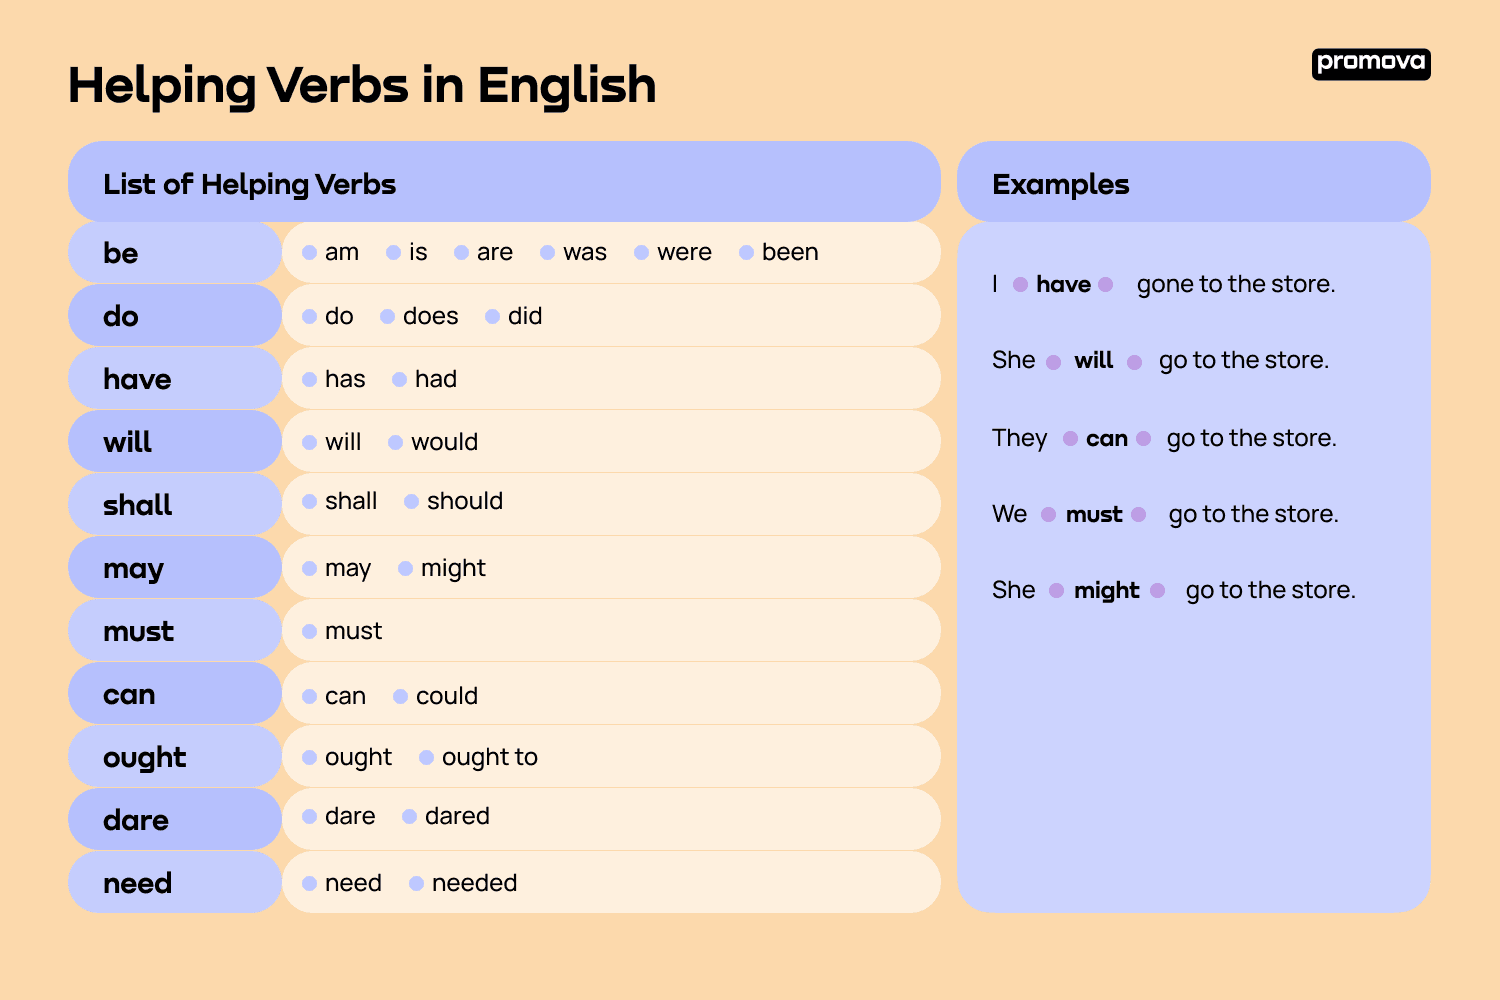 List of Helping Verbs in English